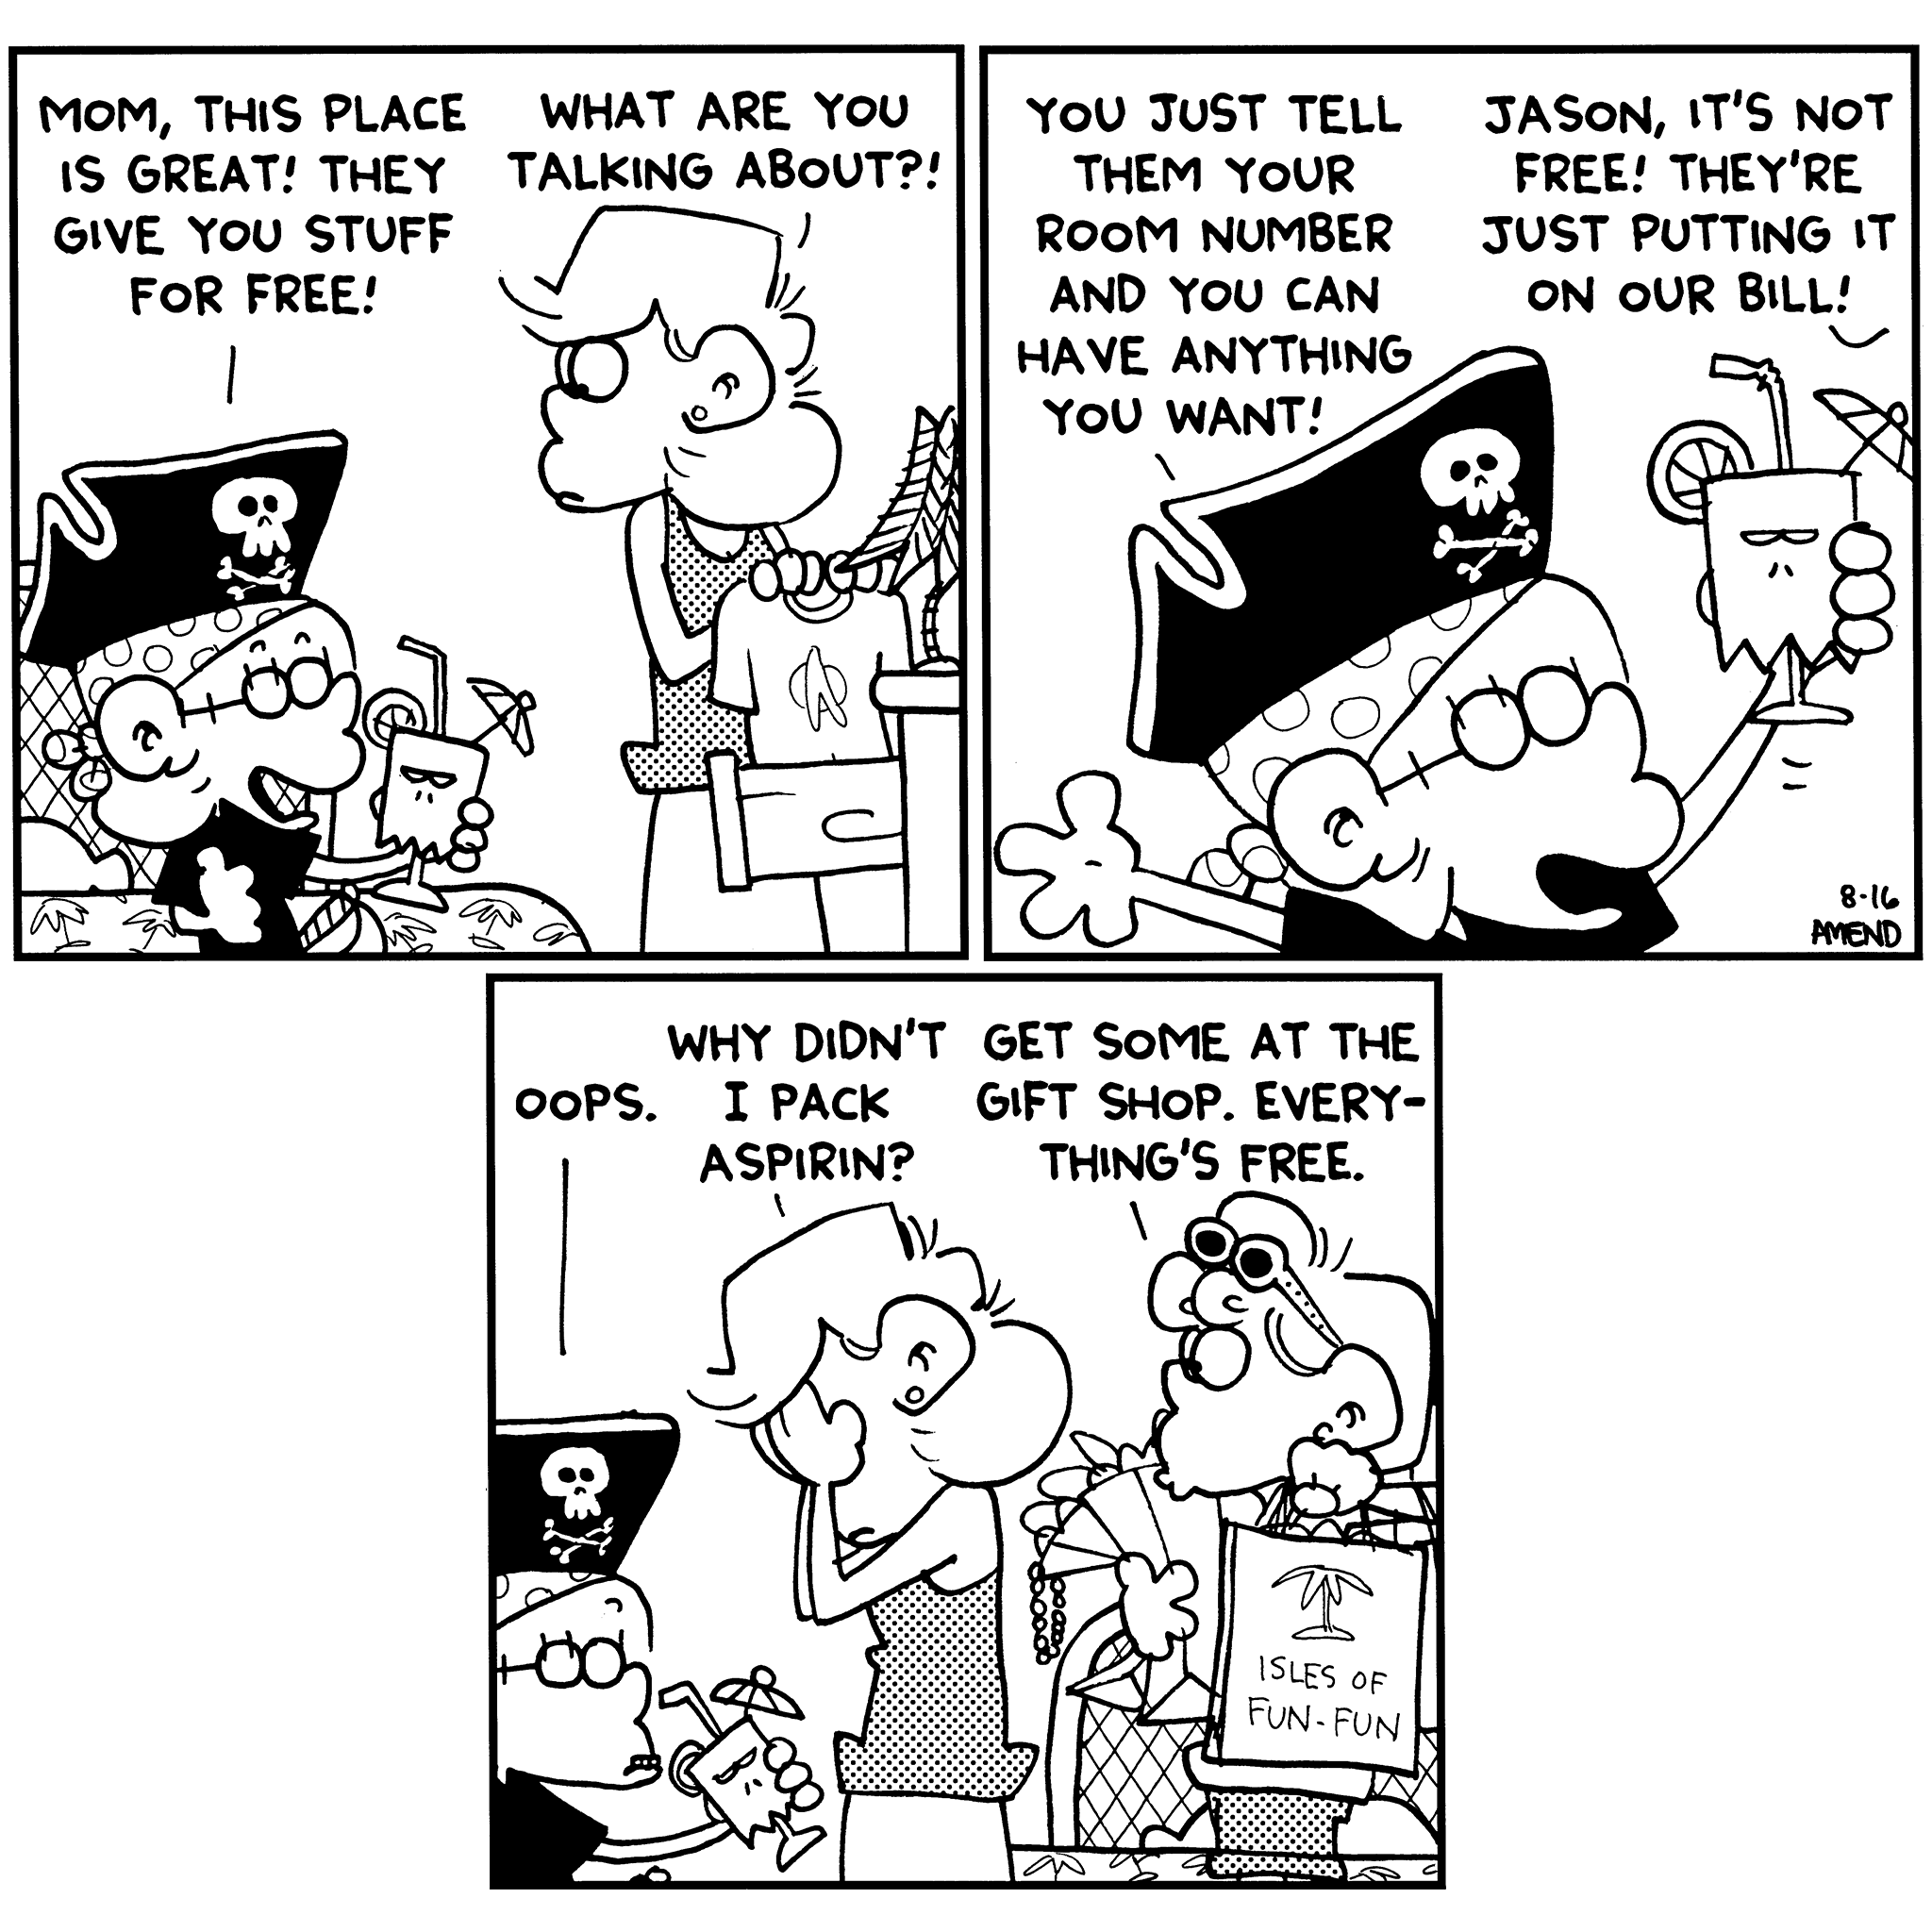 FoxTrot comic strip by Bill Amend - August 16, 2001 - Caribbeanny Vacation